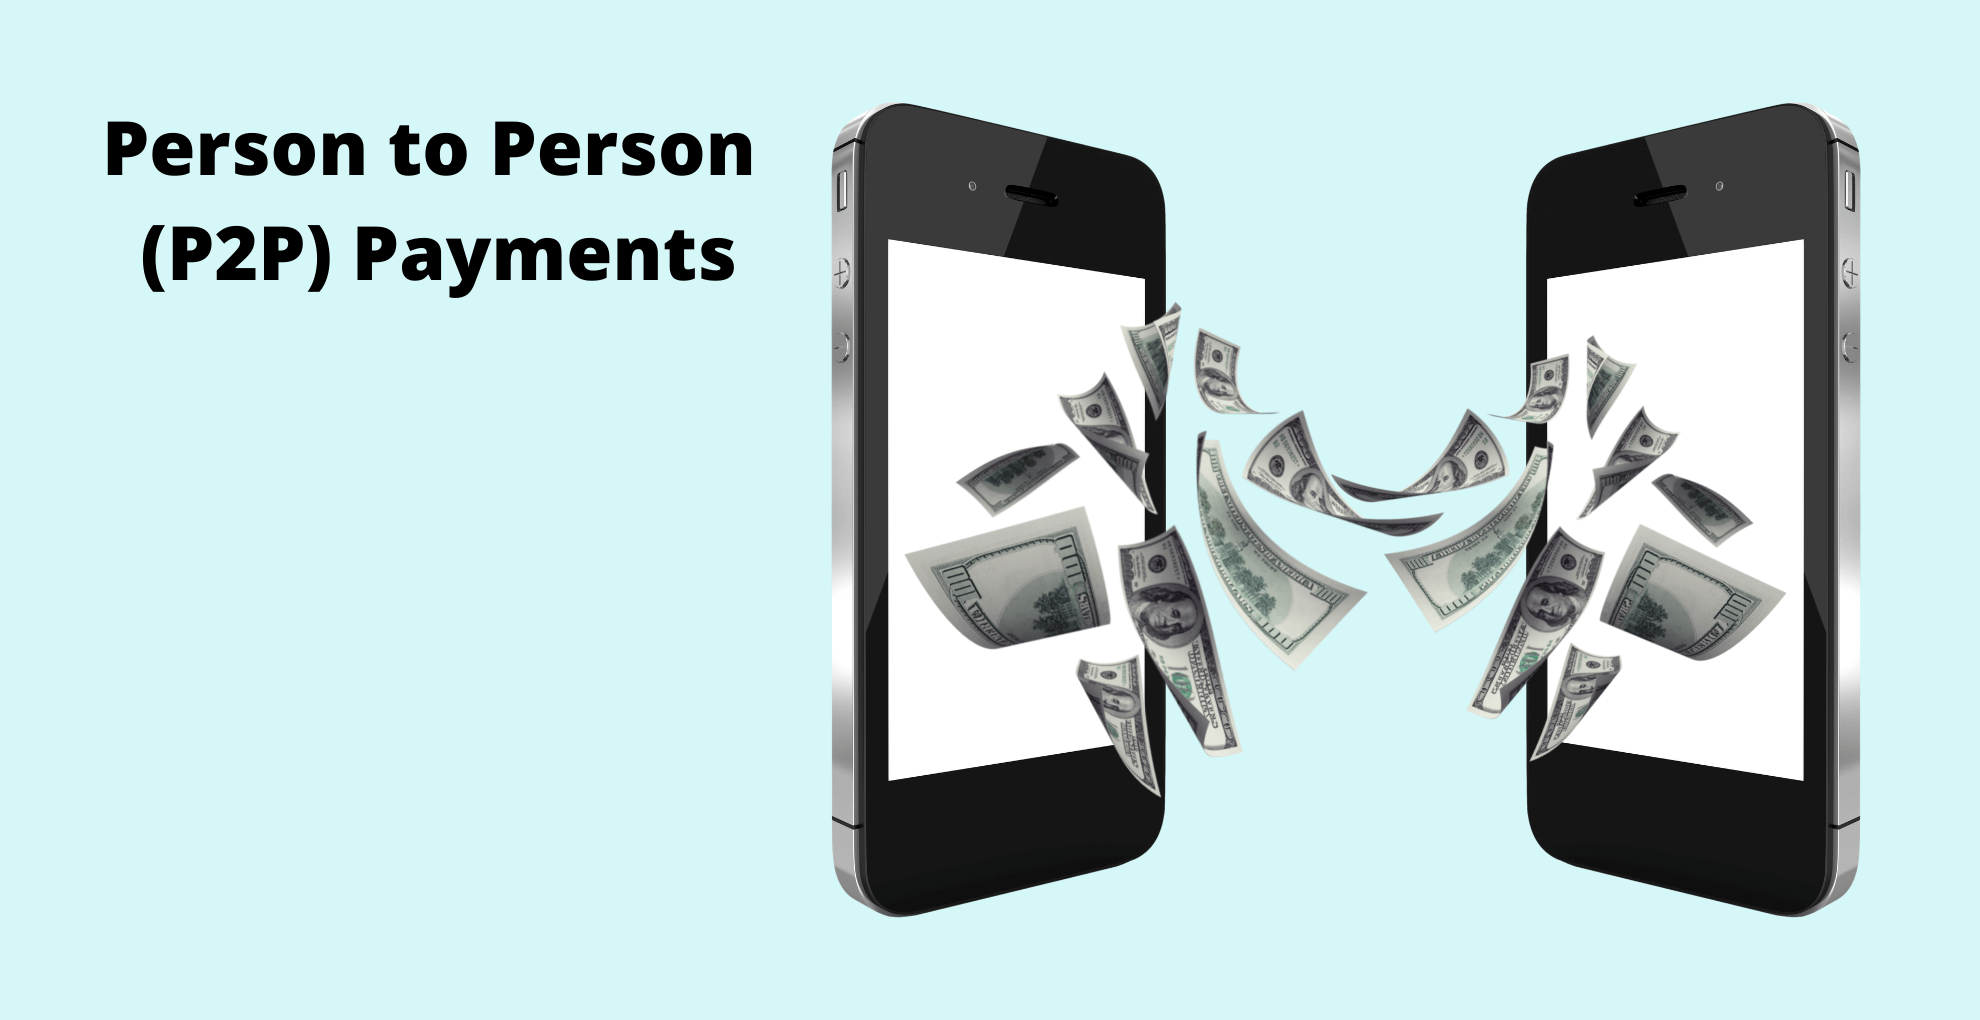 Person to Person (P2P) Payments